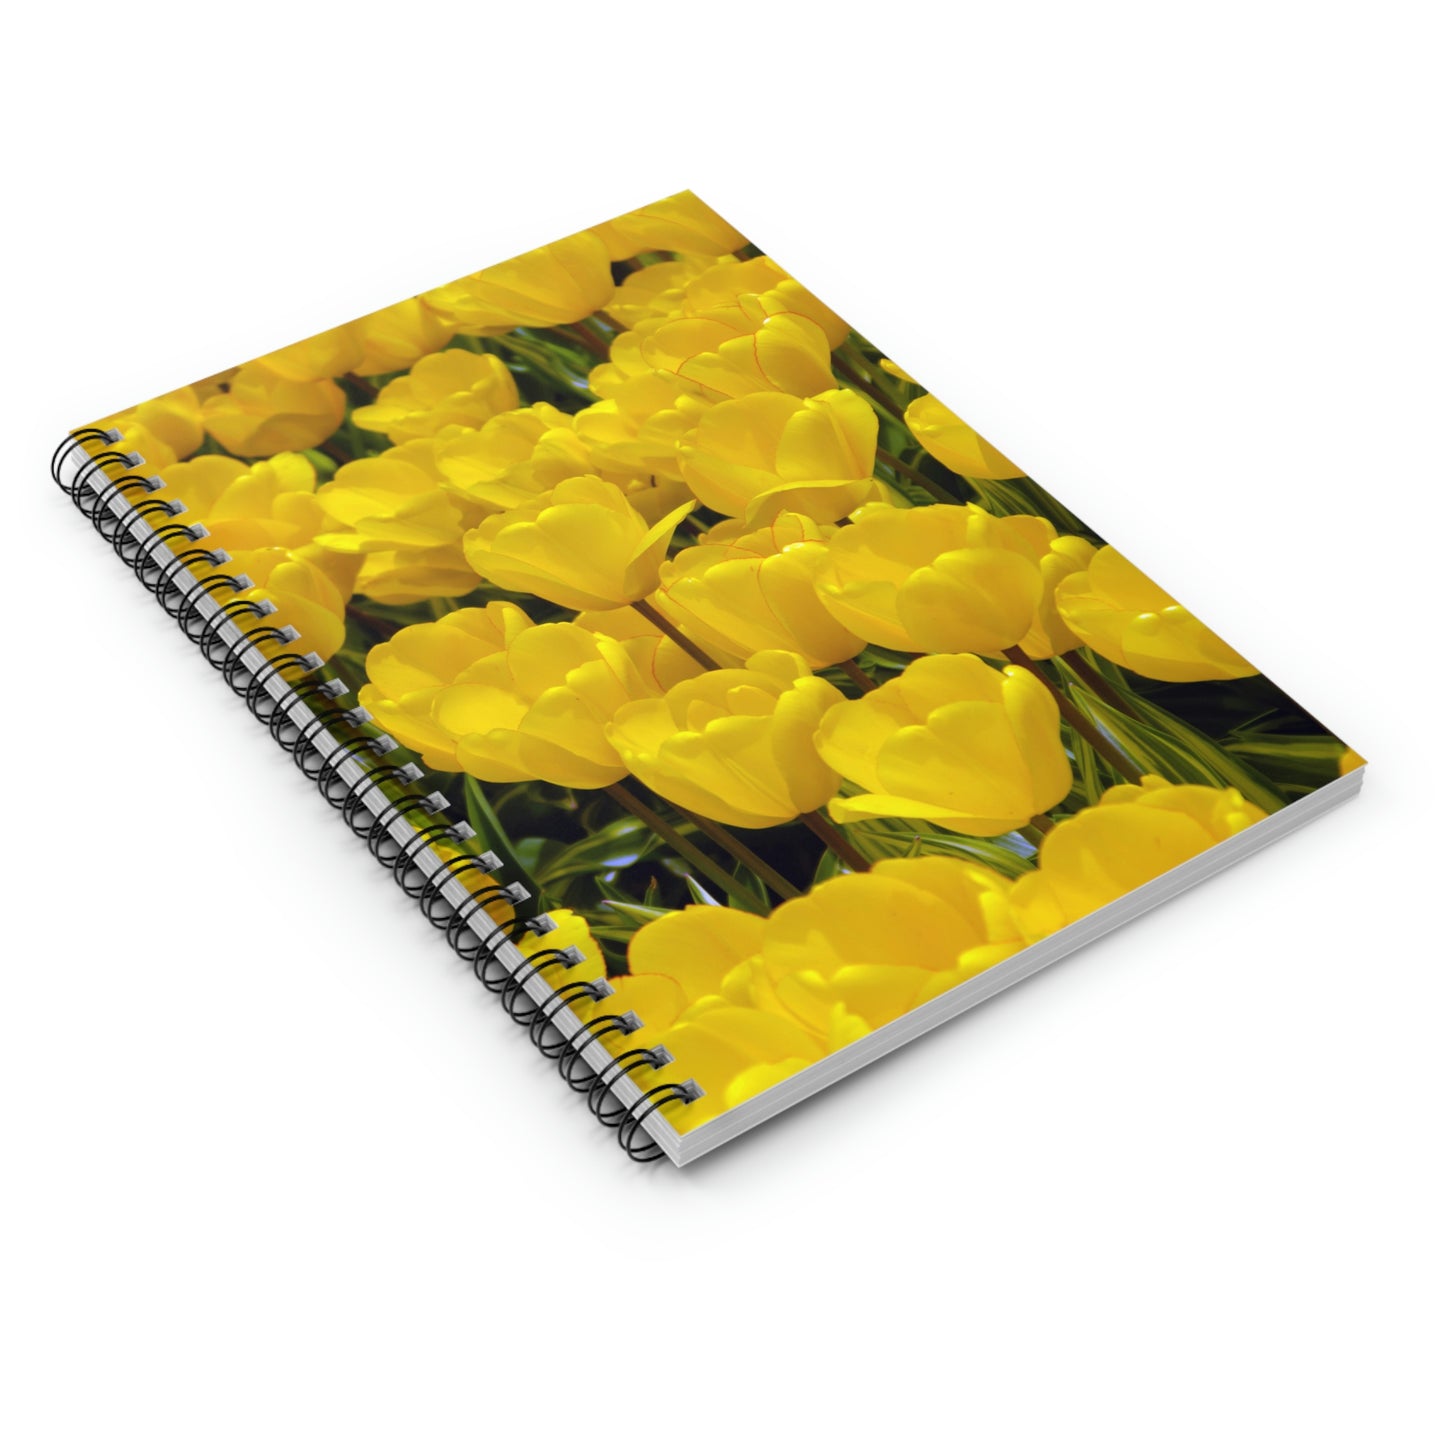 Flowers 23 Spiral Notebook - Ruled Line